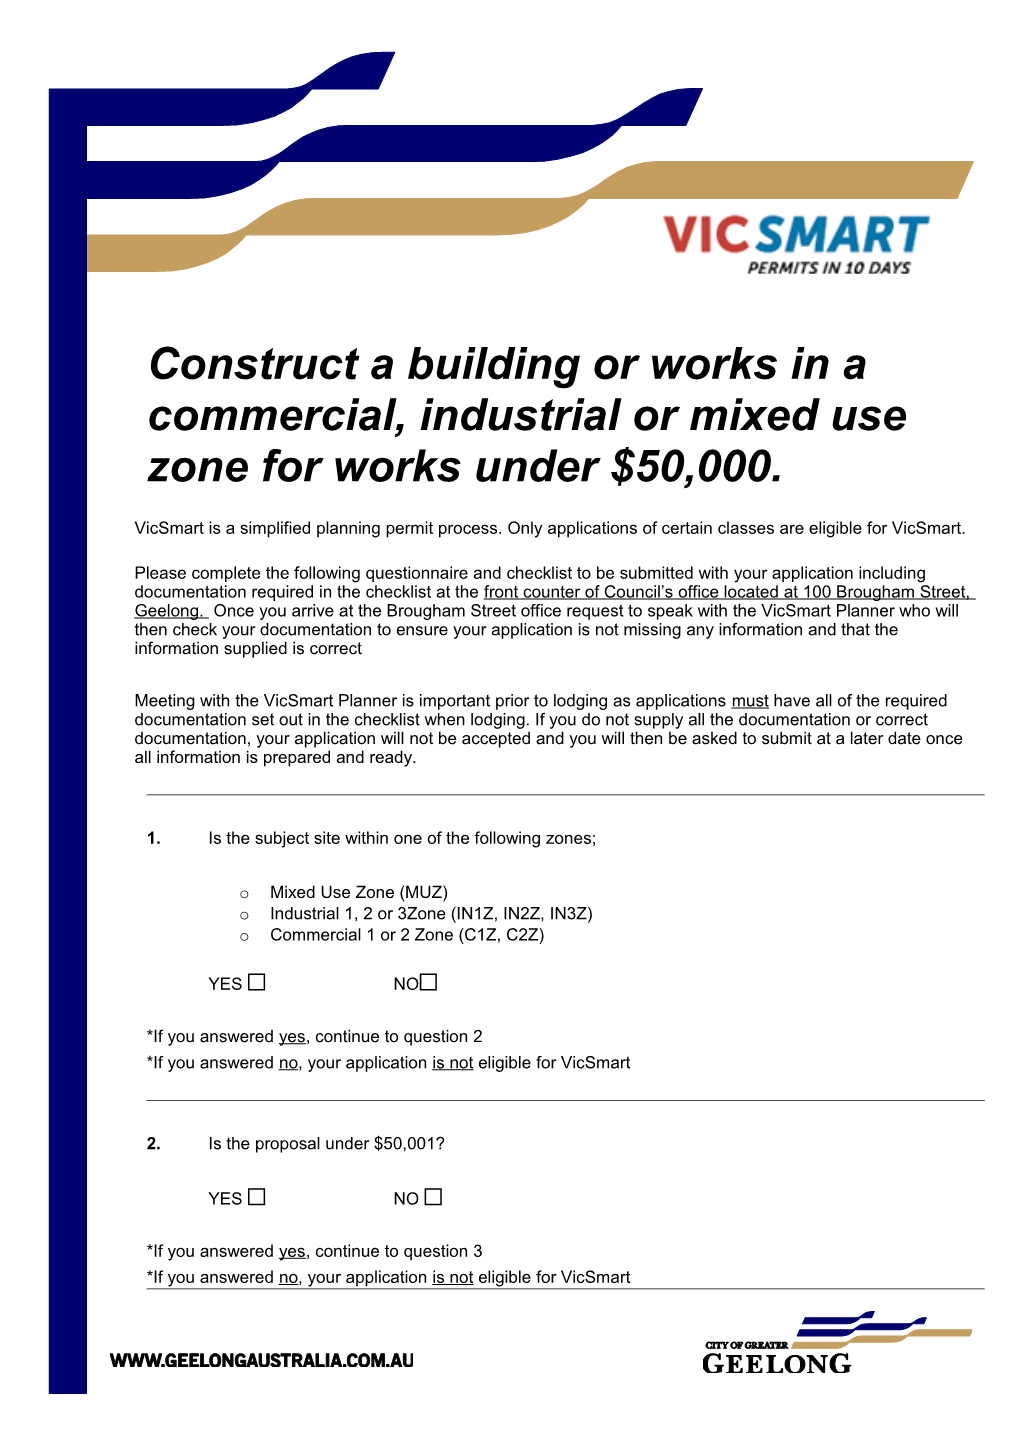 Construct a Building Or Works in a Commercial, Industrial Or Mixed Use Zone for Works